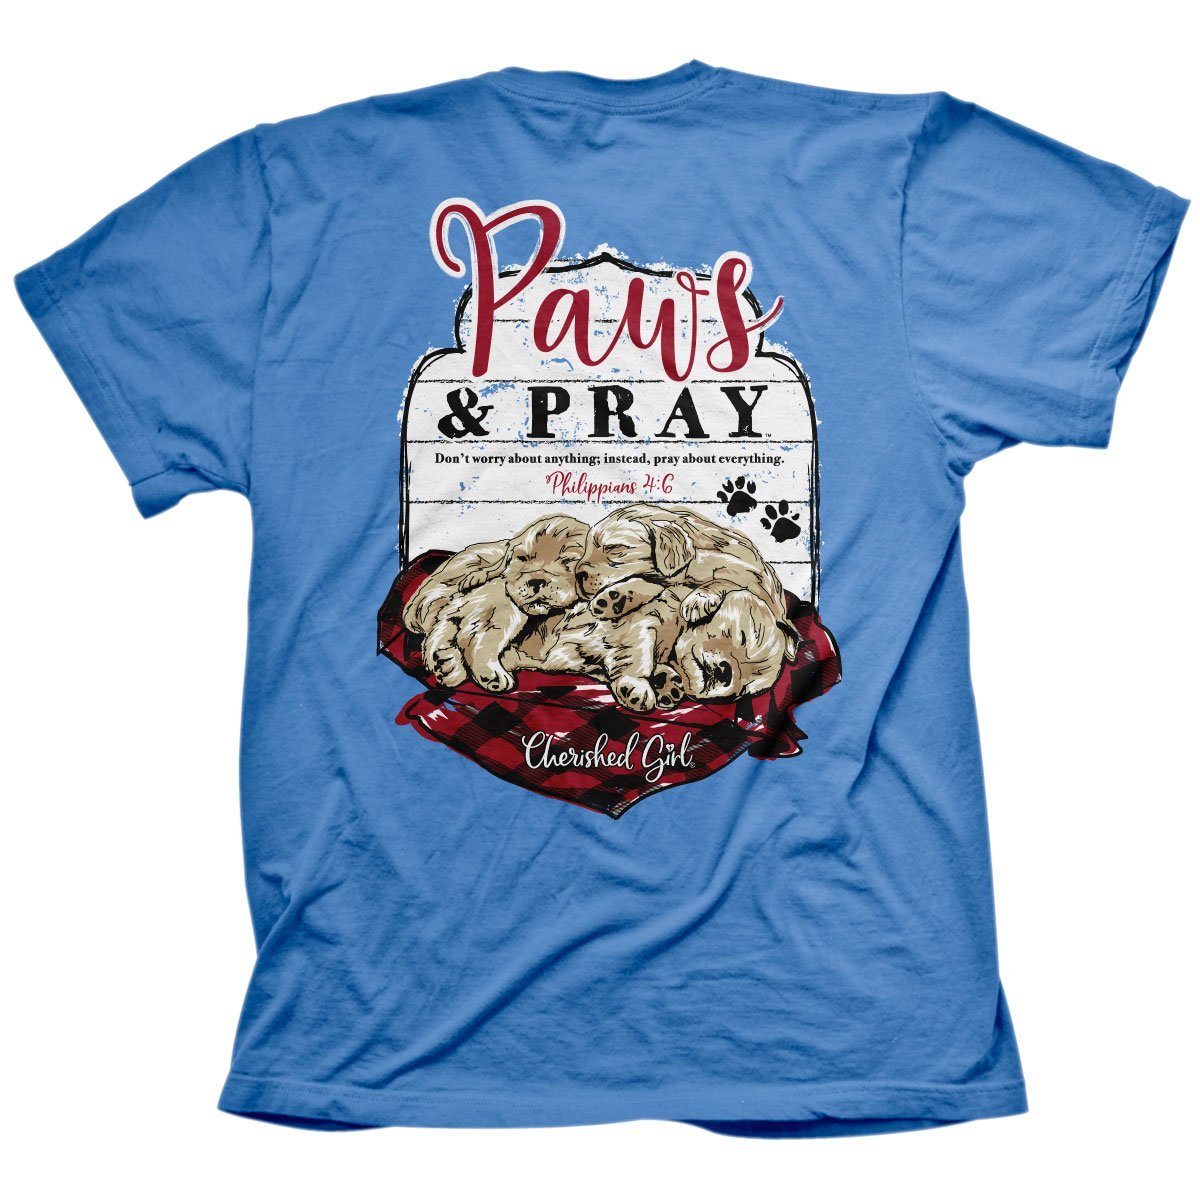 Cherished Girl Paws & Pray Dog Puppies Girlie Christian Bright T Shirt